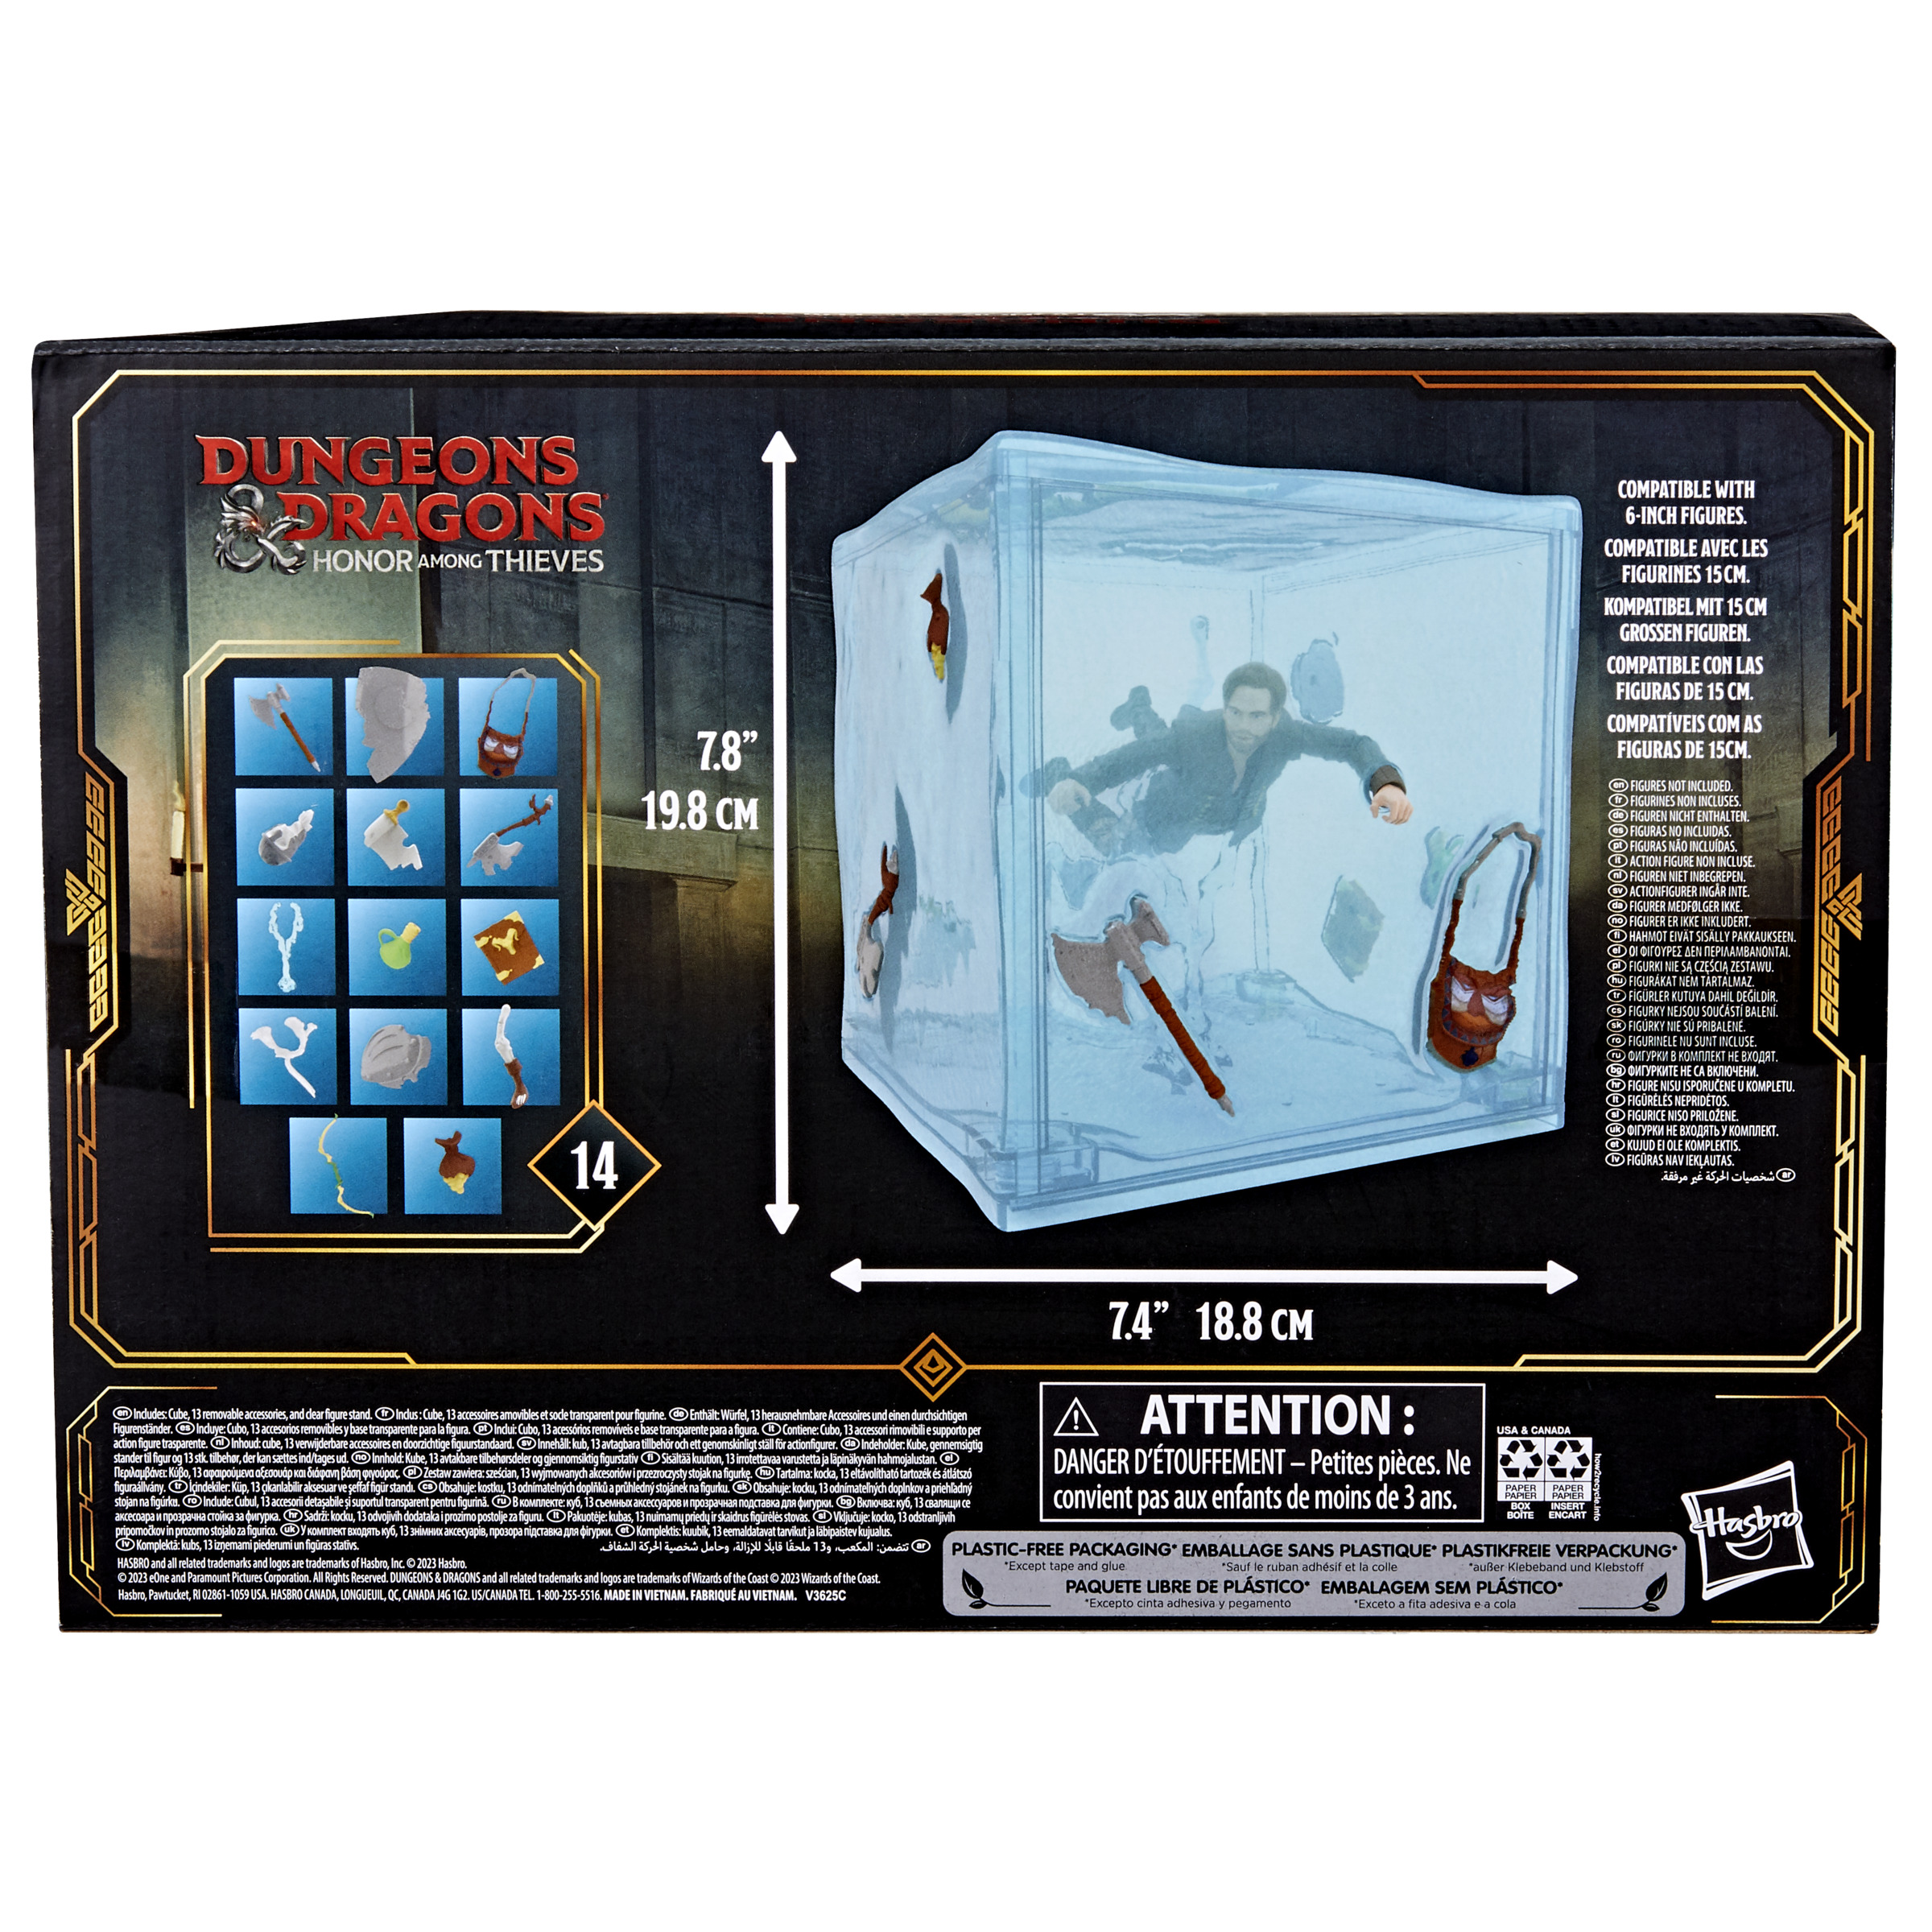 Dungeons & HASBRO The honor Lernspiel thieves of Dragons: